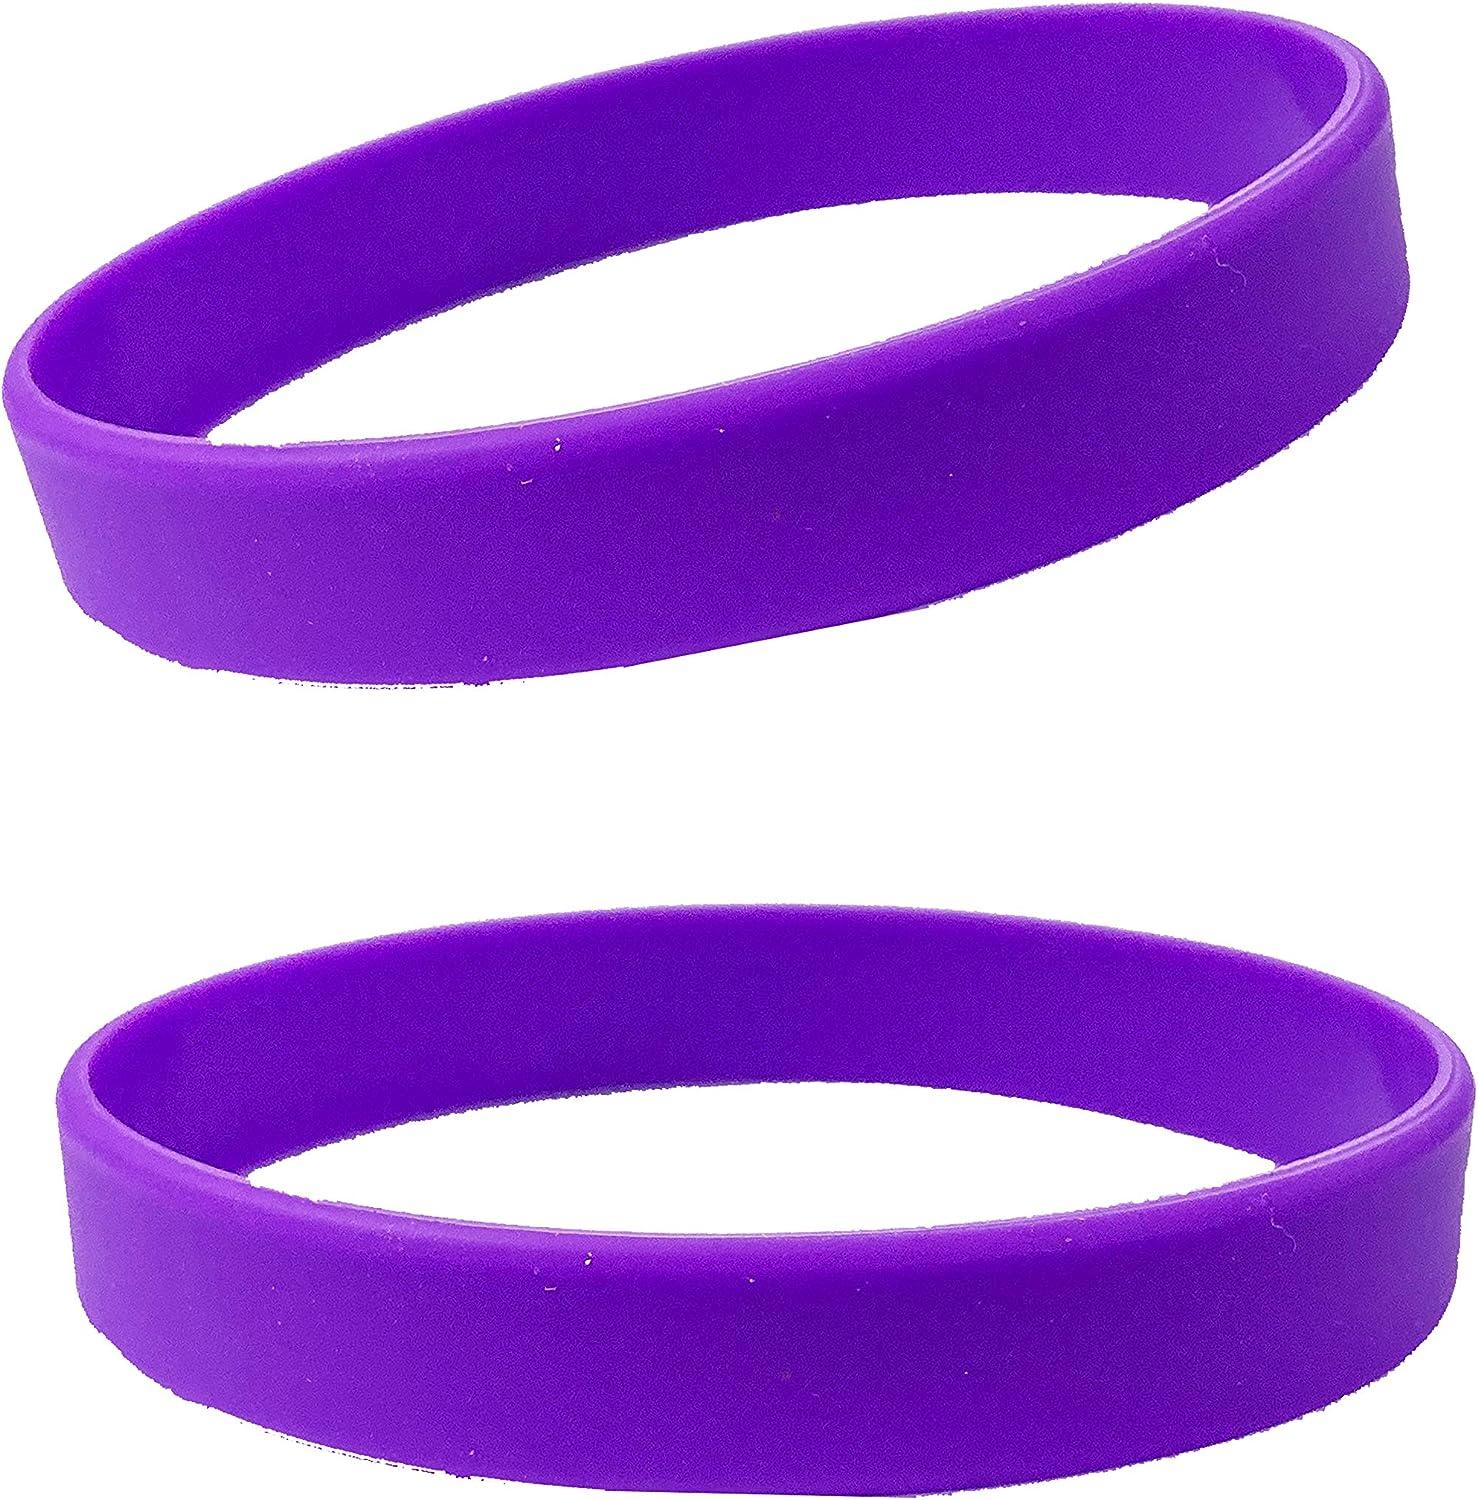 Buy Good Character Traits Silicone Bracelets (Pack of 24) at S&S Worldwide